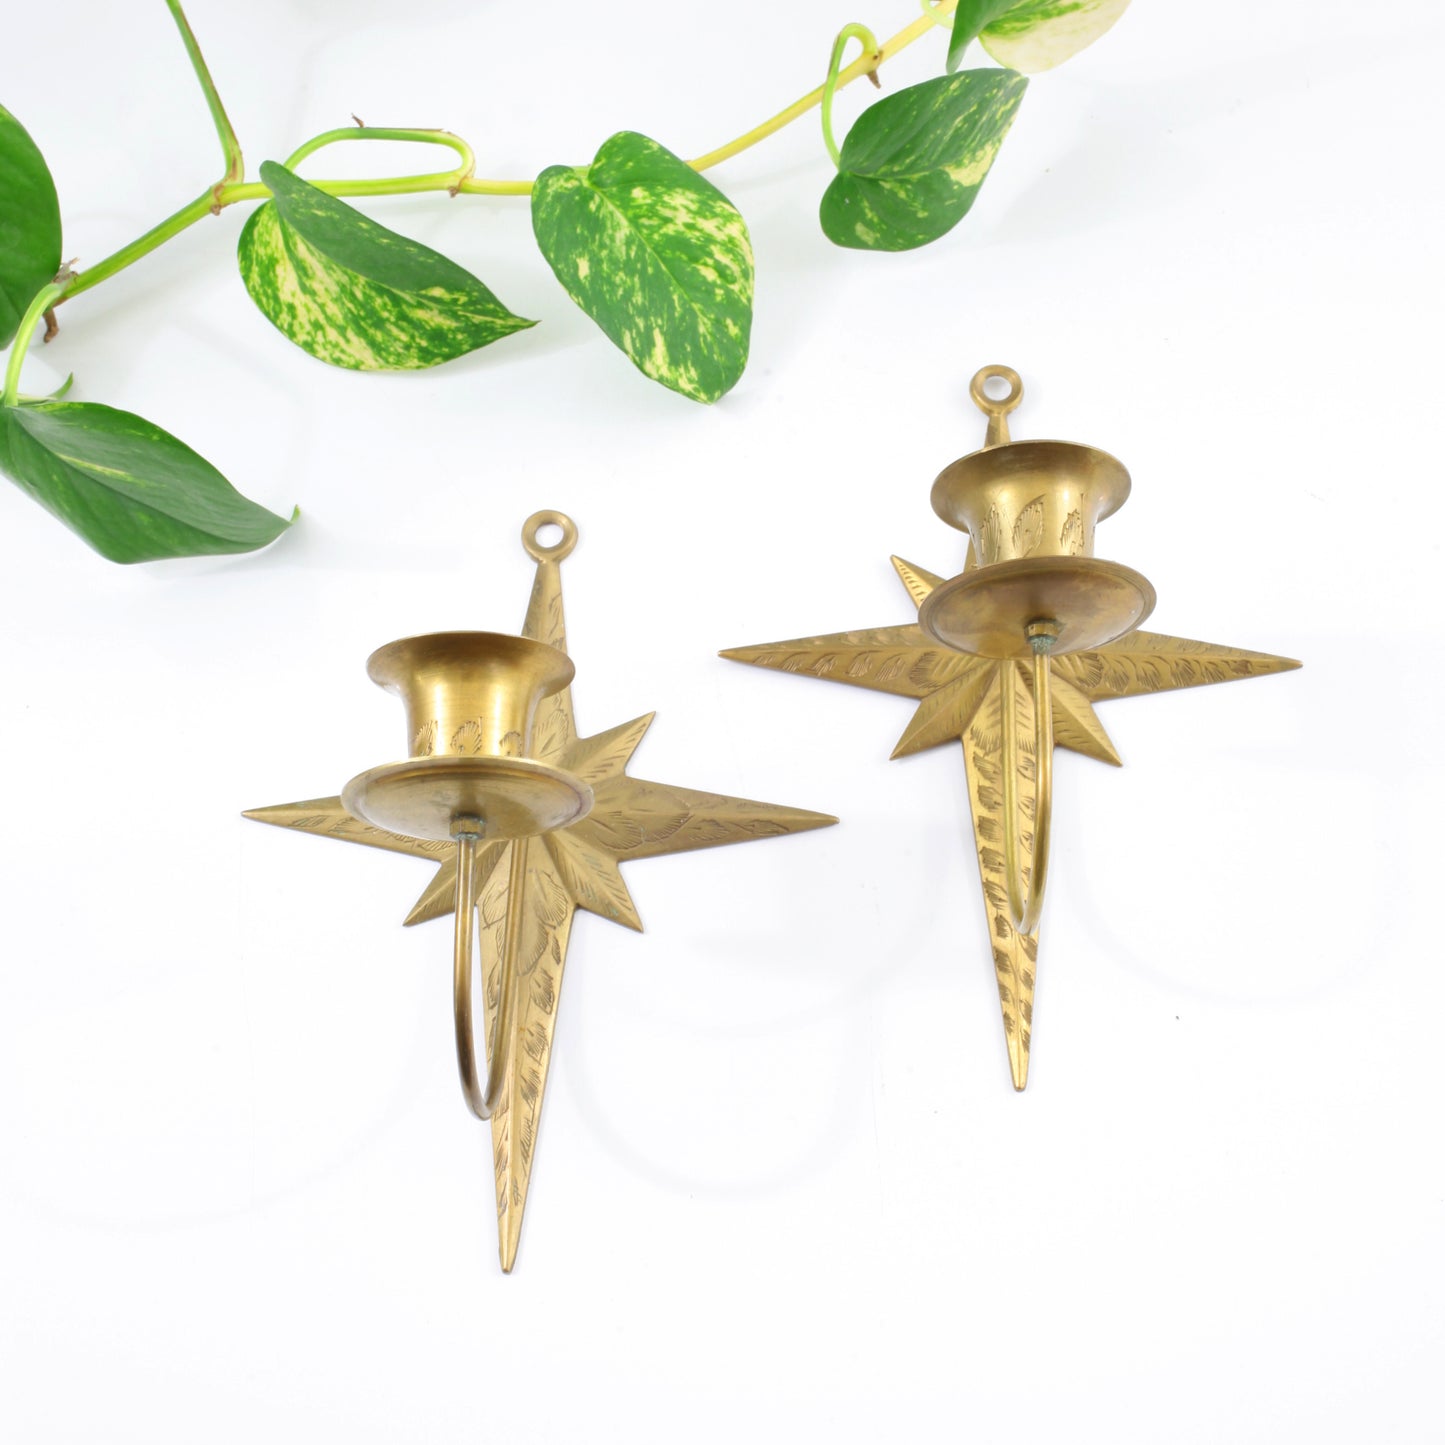 SOLD - Mid Century Modern Brass Starburst Wall Sconce Candle Holders